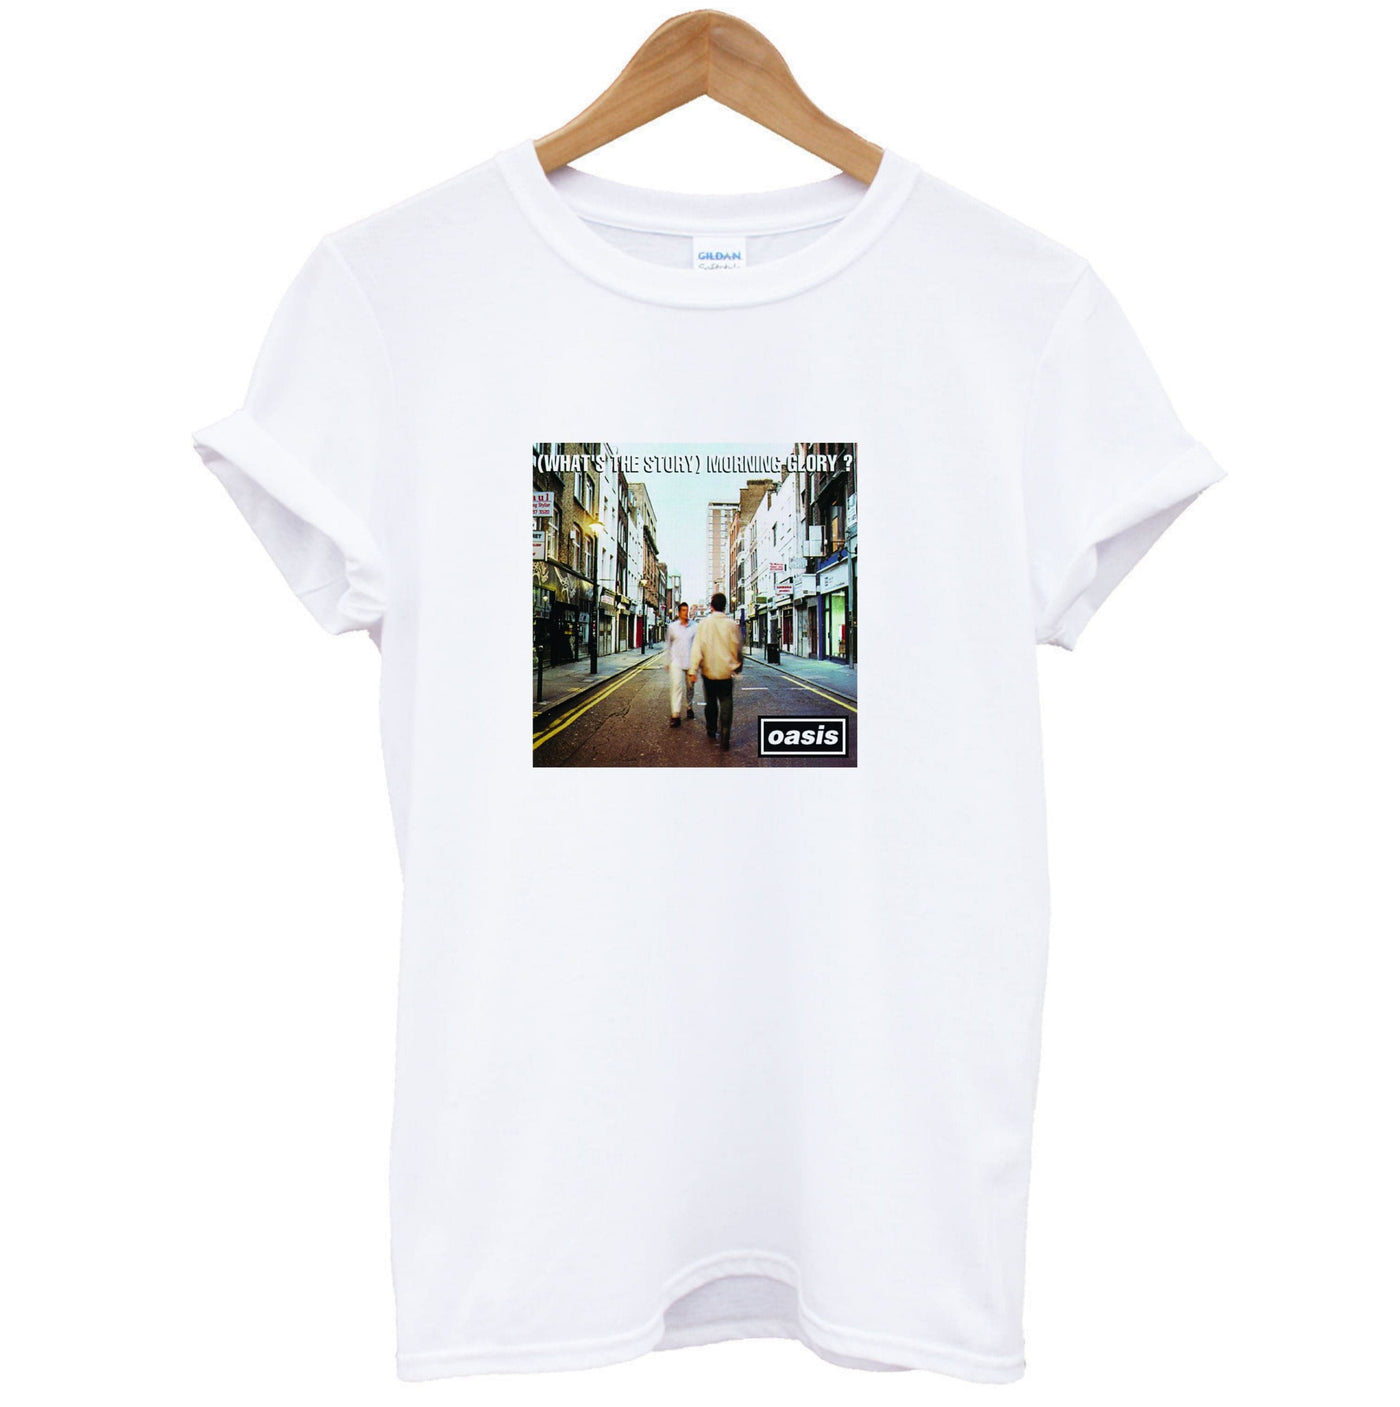 What's The Story - Oasis T-Shirt